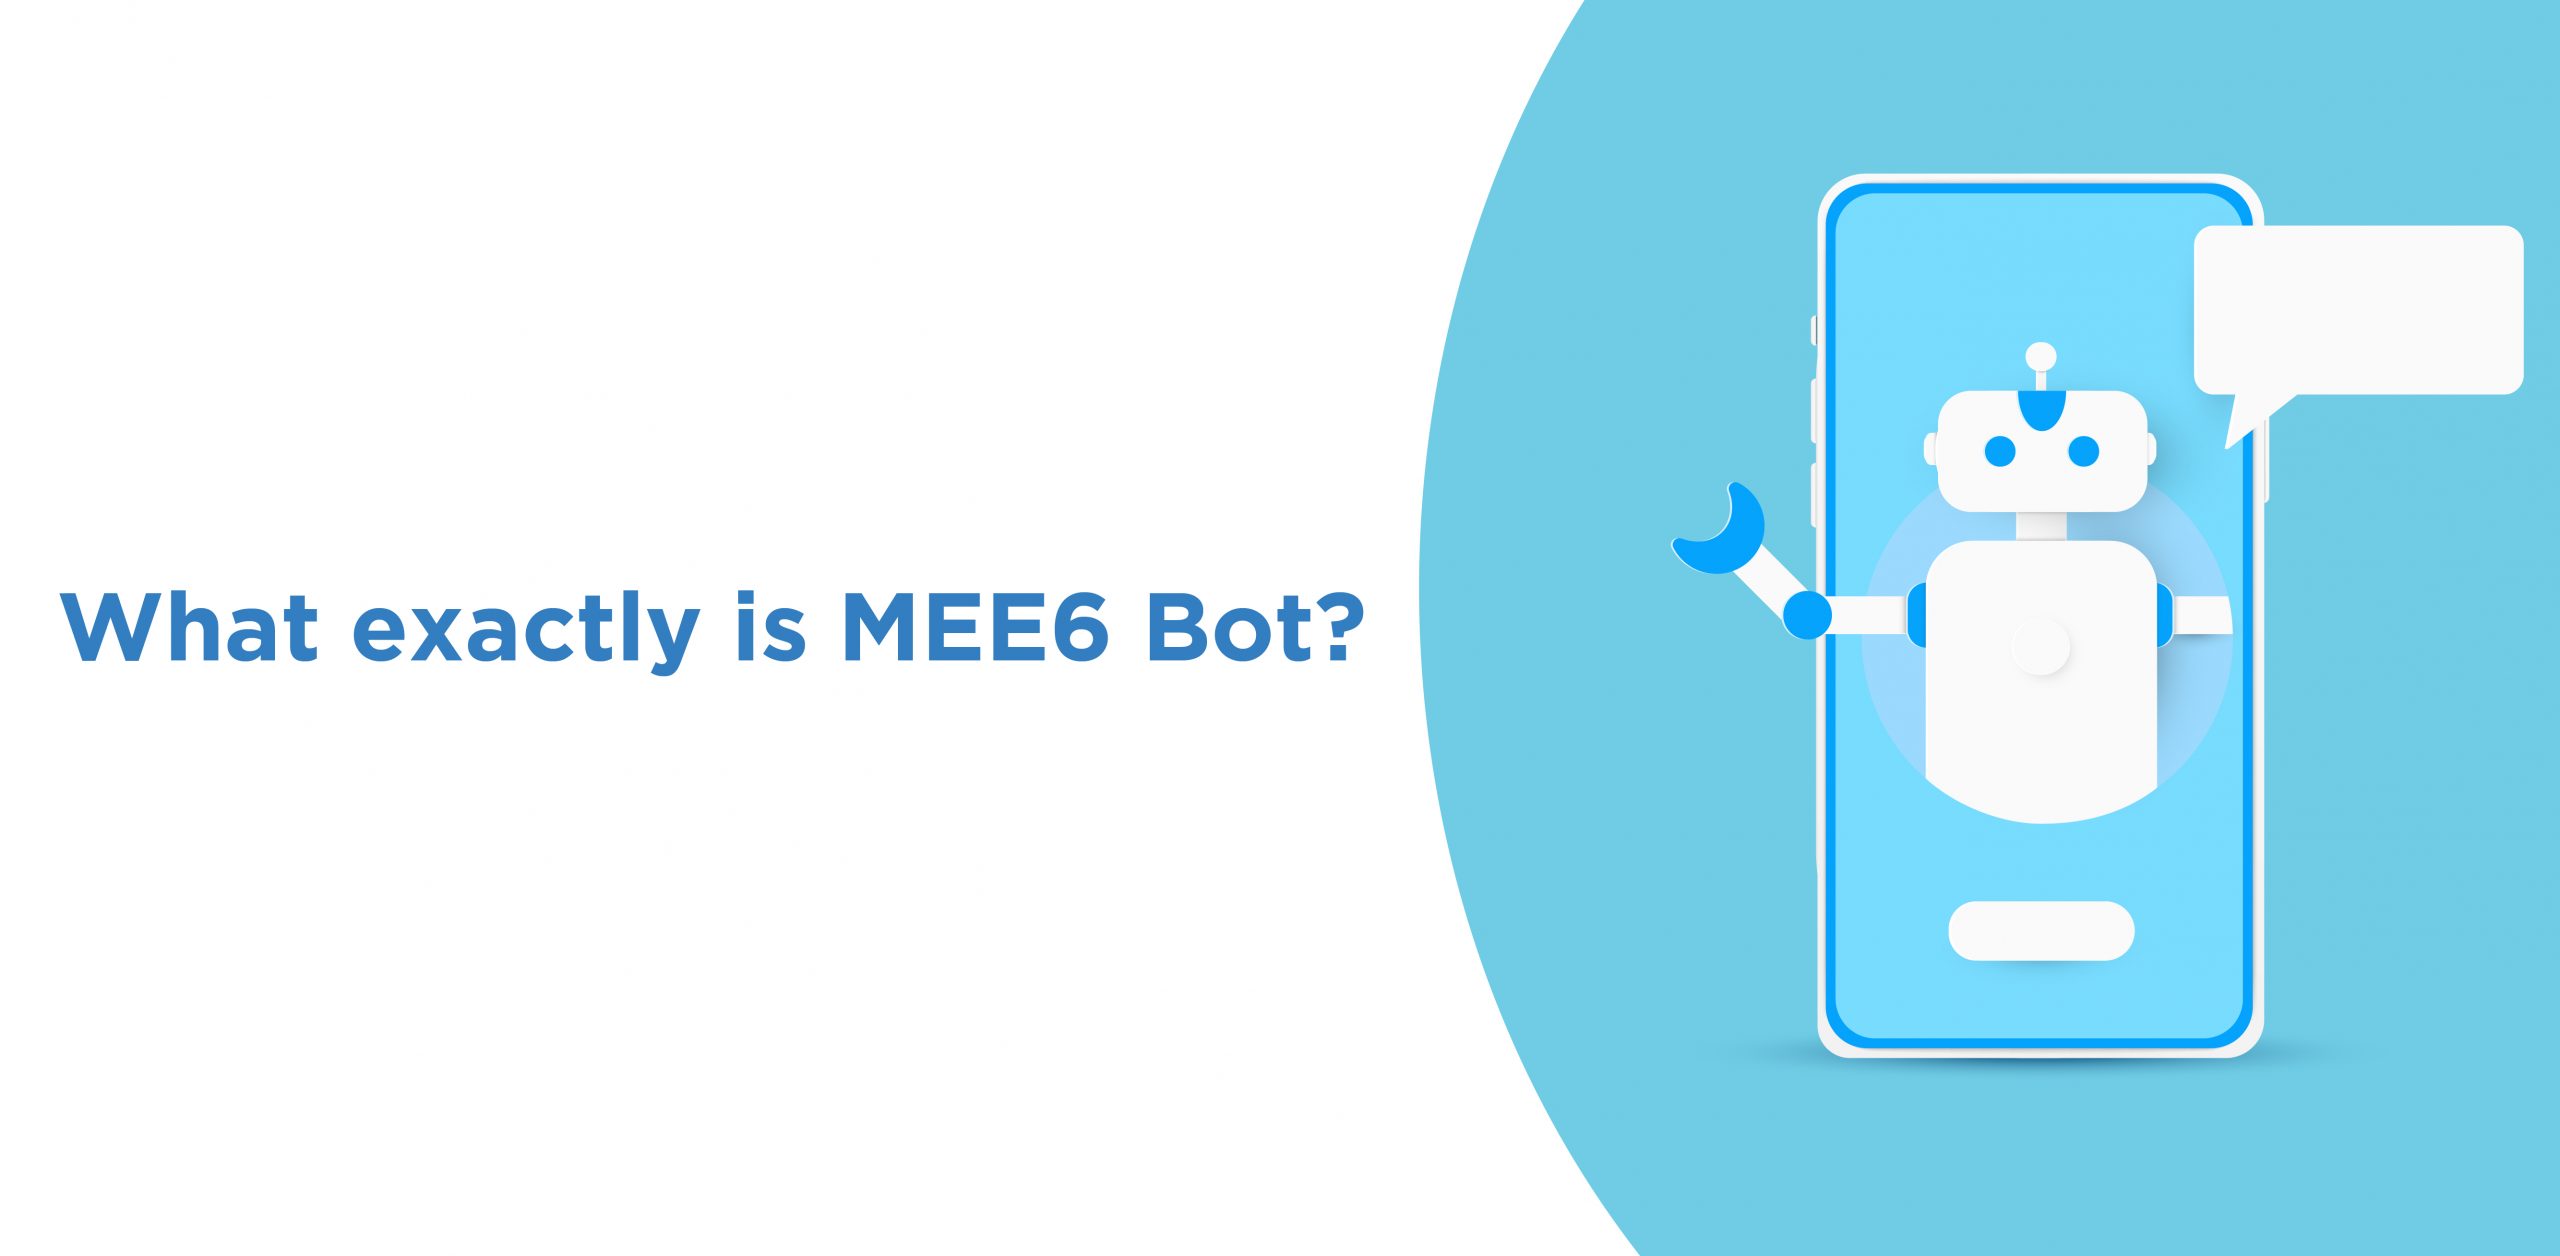 What exactly is MEE6 Bot?